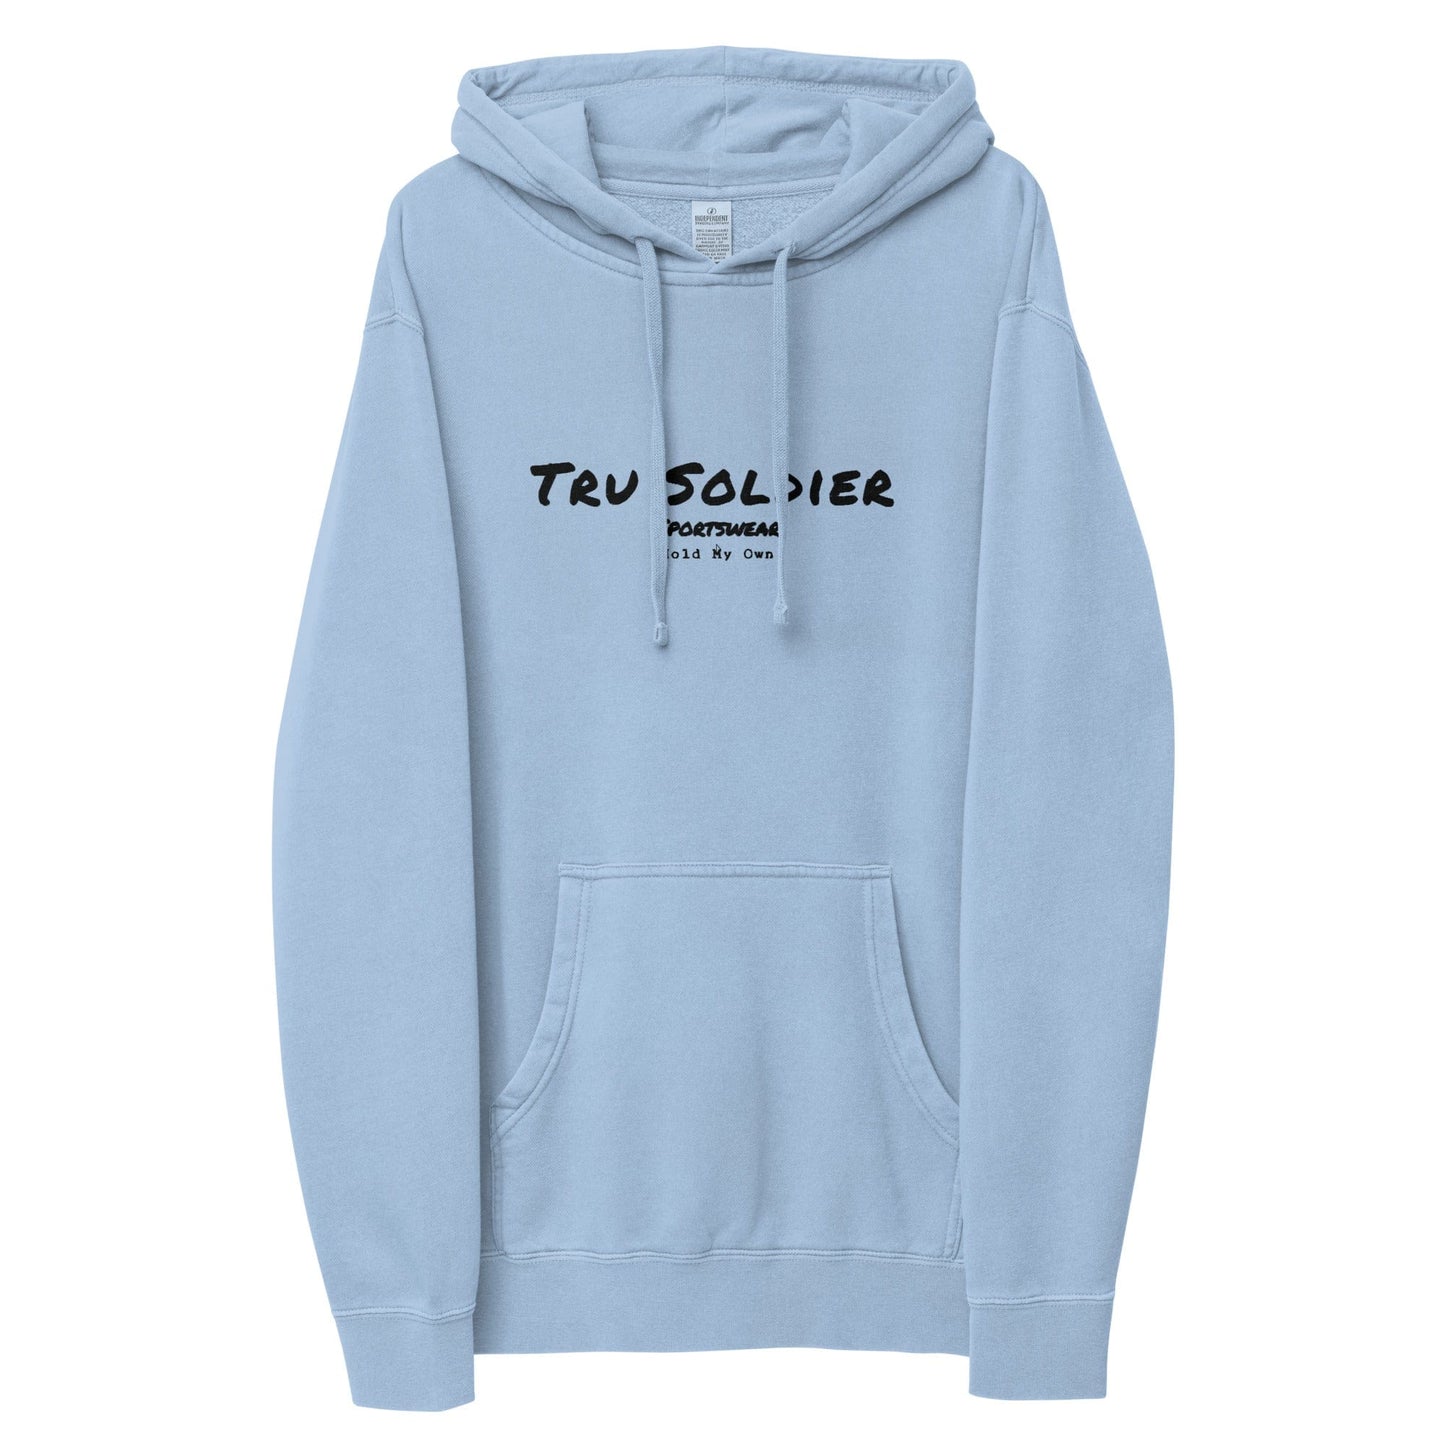 Tru Soldier Sportswear  Pigment Light Blue / S Signature embroidered Unisex pigment-dyed hoodie